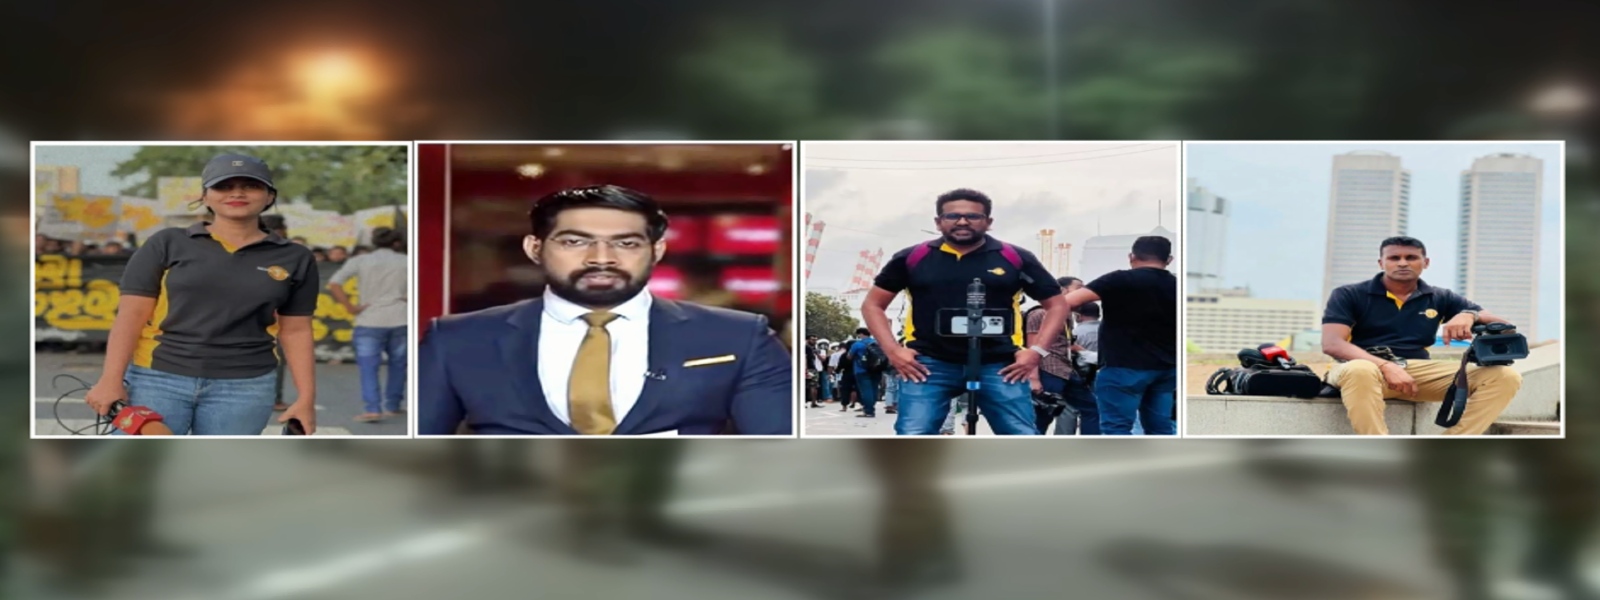 Journalists attacked during Live Prime Time News